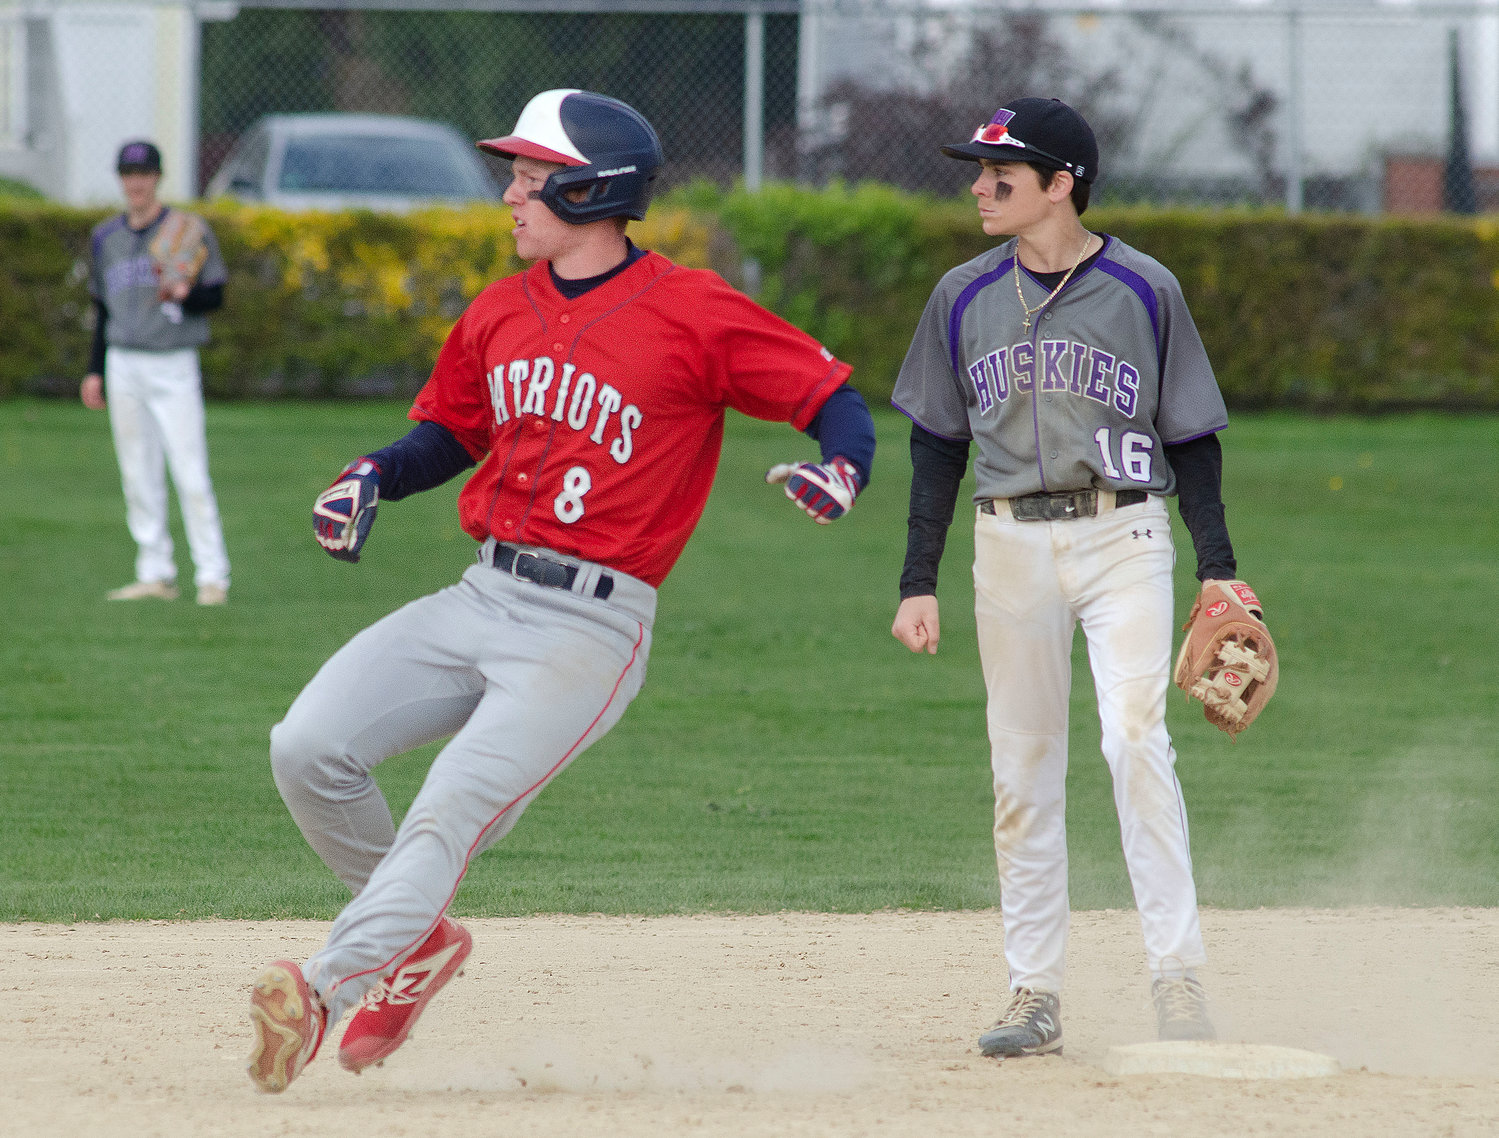 Owen Malone rounds second base after smacking a double during the game.